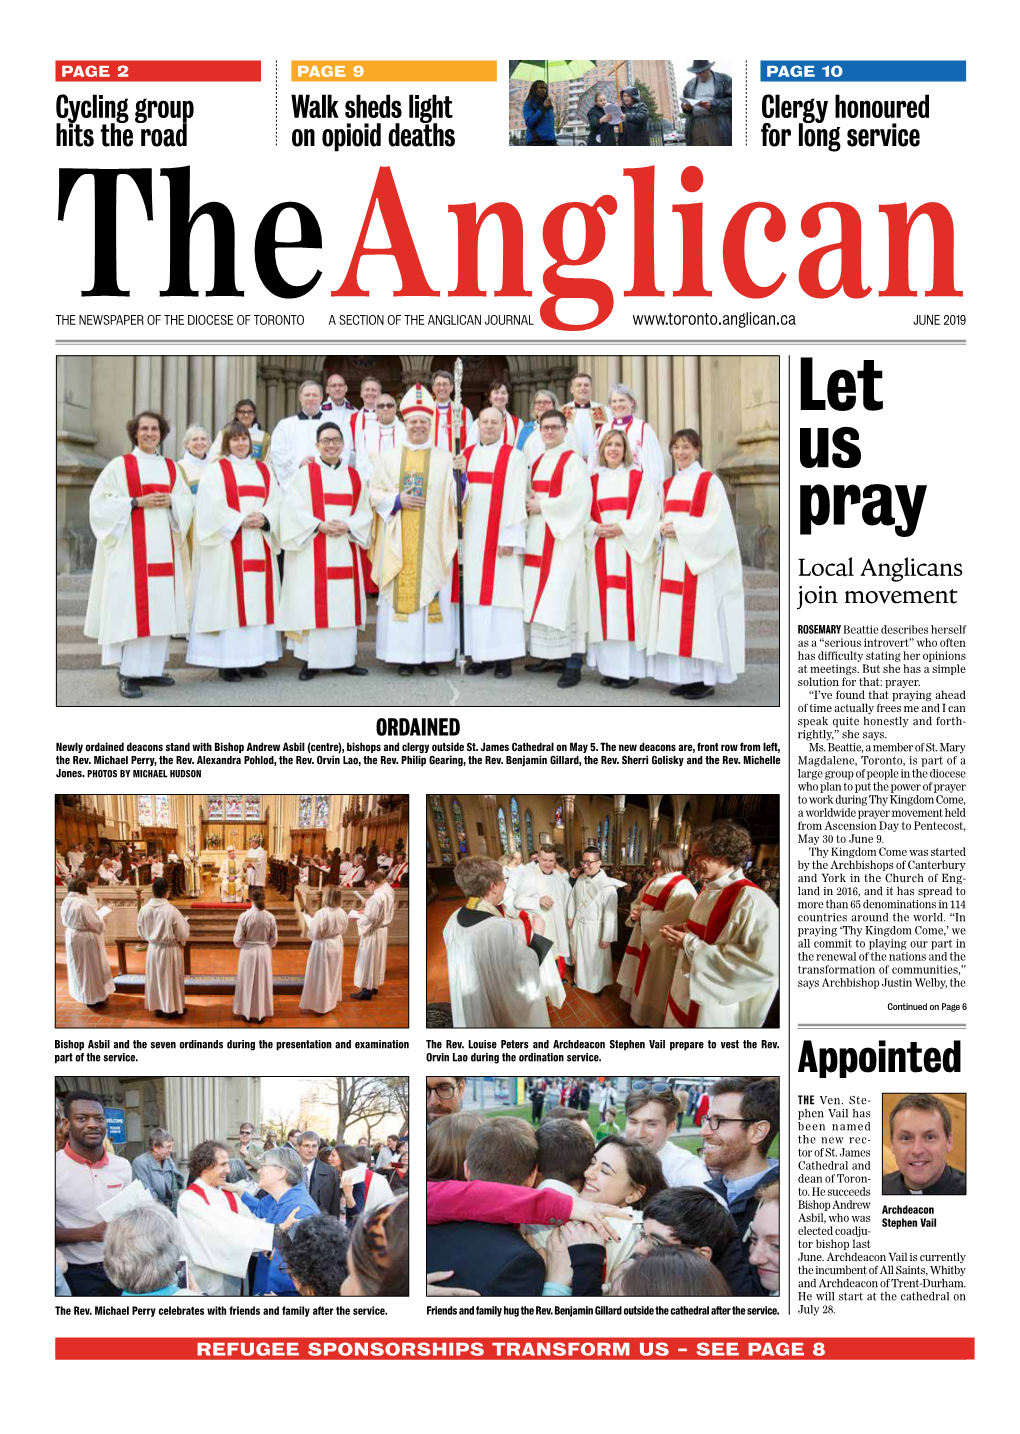 Let Us Pray Local Anglicans Join Movement